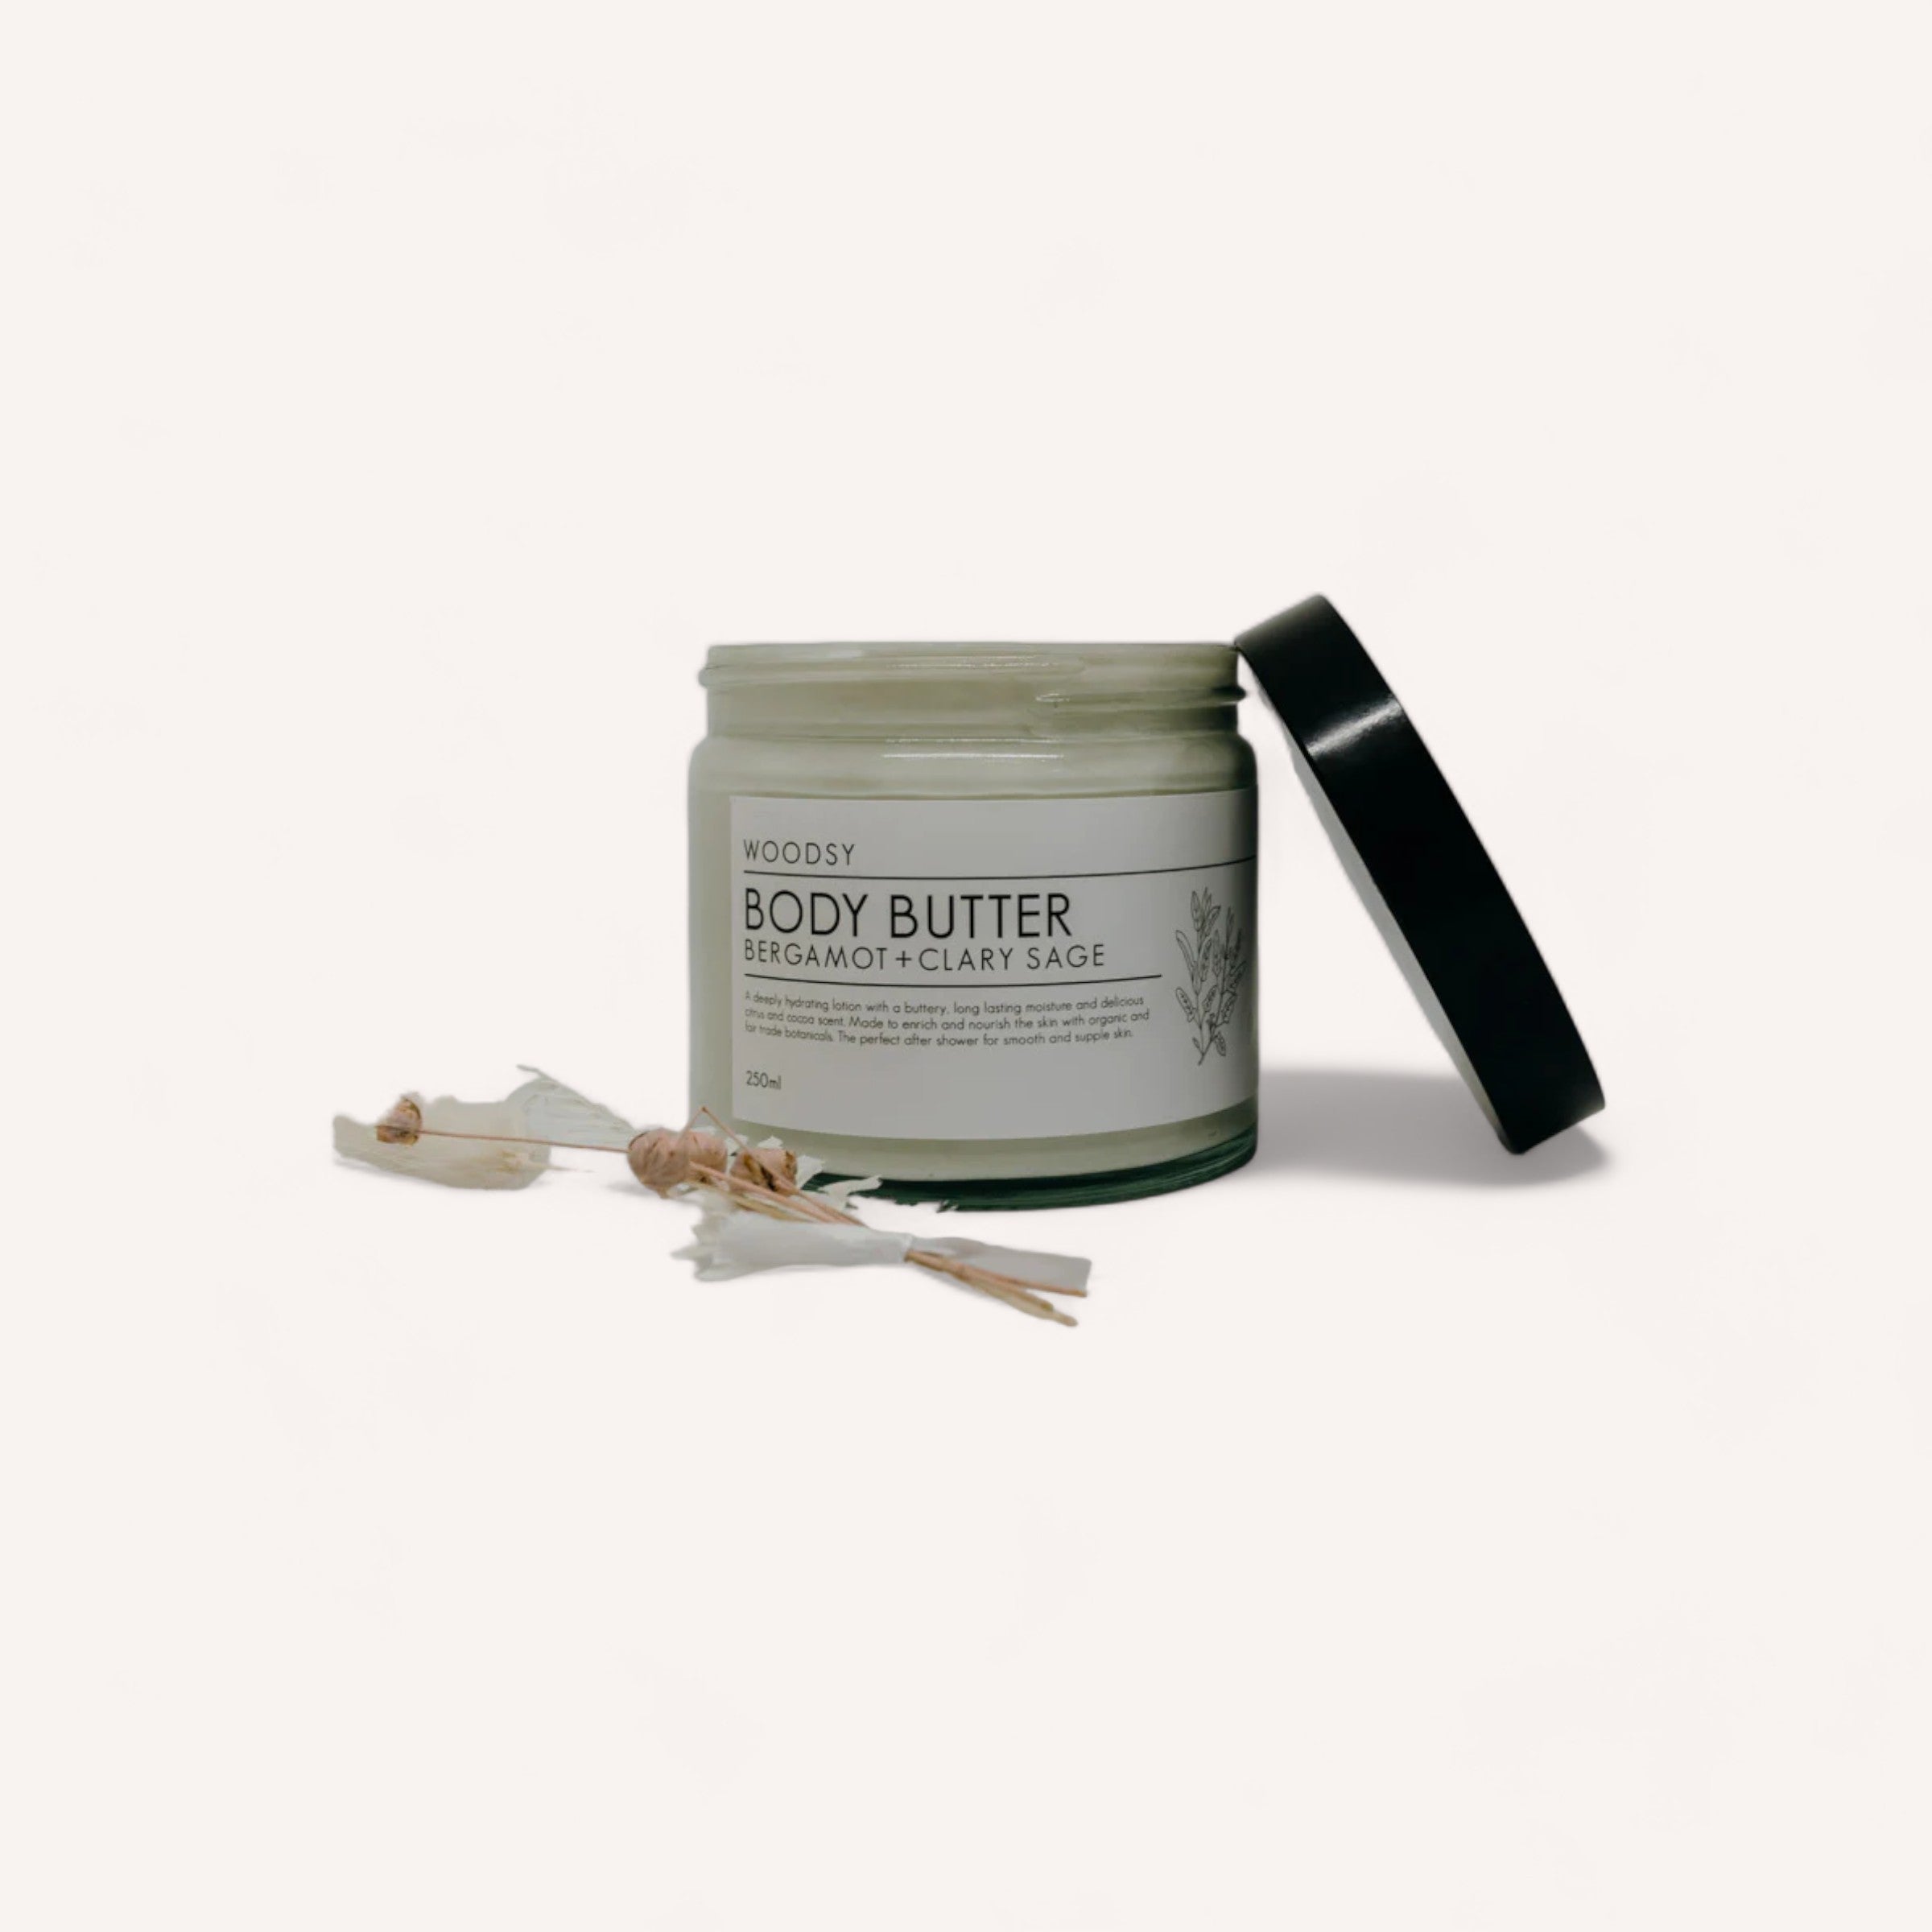 Sentence with replaced product: A jar of organic skin care Sage & Bergamot body butter by Woodsy Botanics, alongside a small bundle of dried botanicals, on a plain white background.